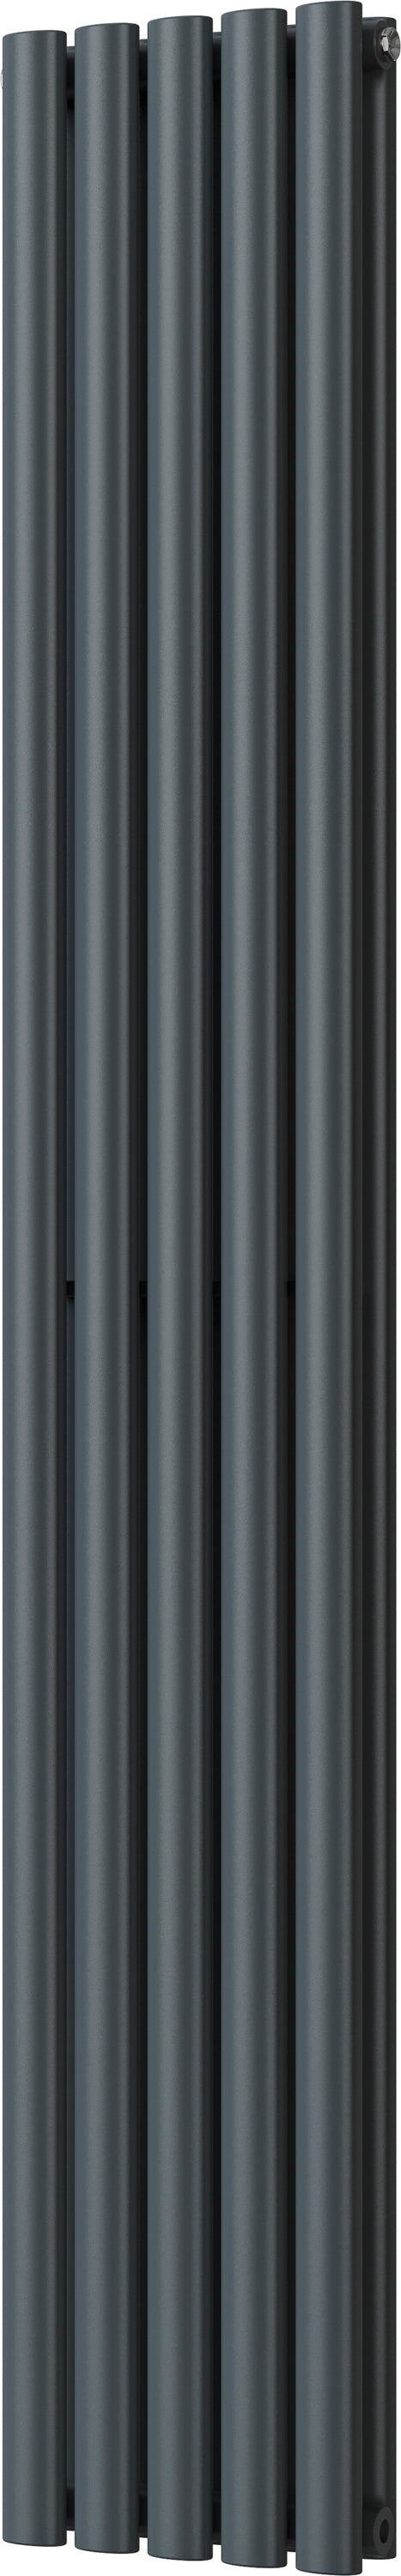 Omeara - Anthracite Vertical Radiator H1800mm x W290mm Double Panel